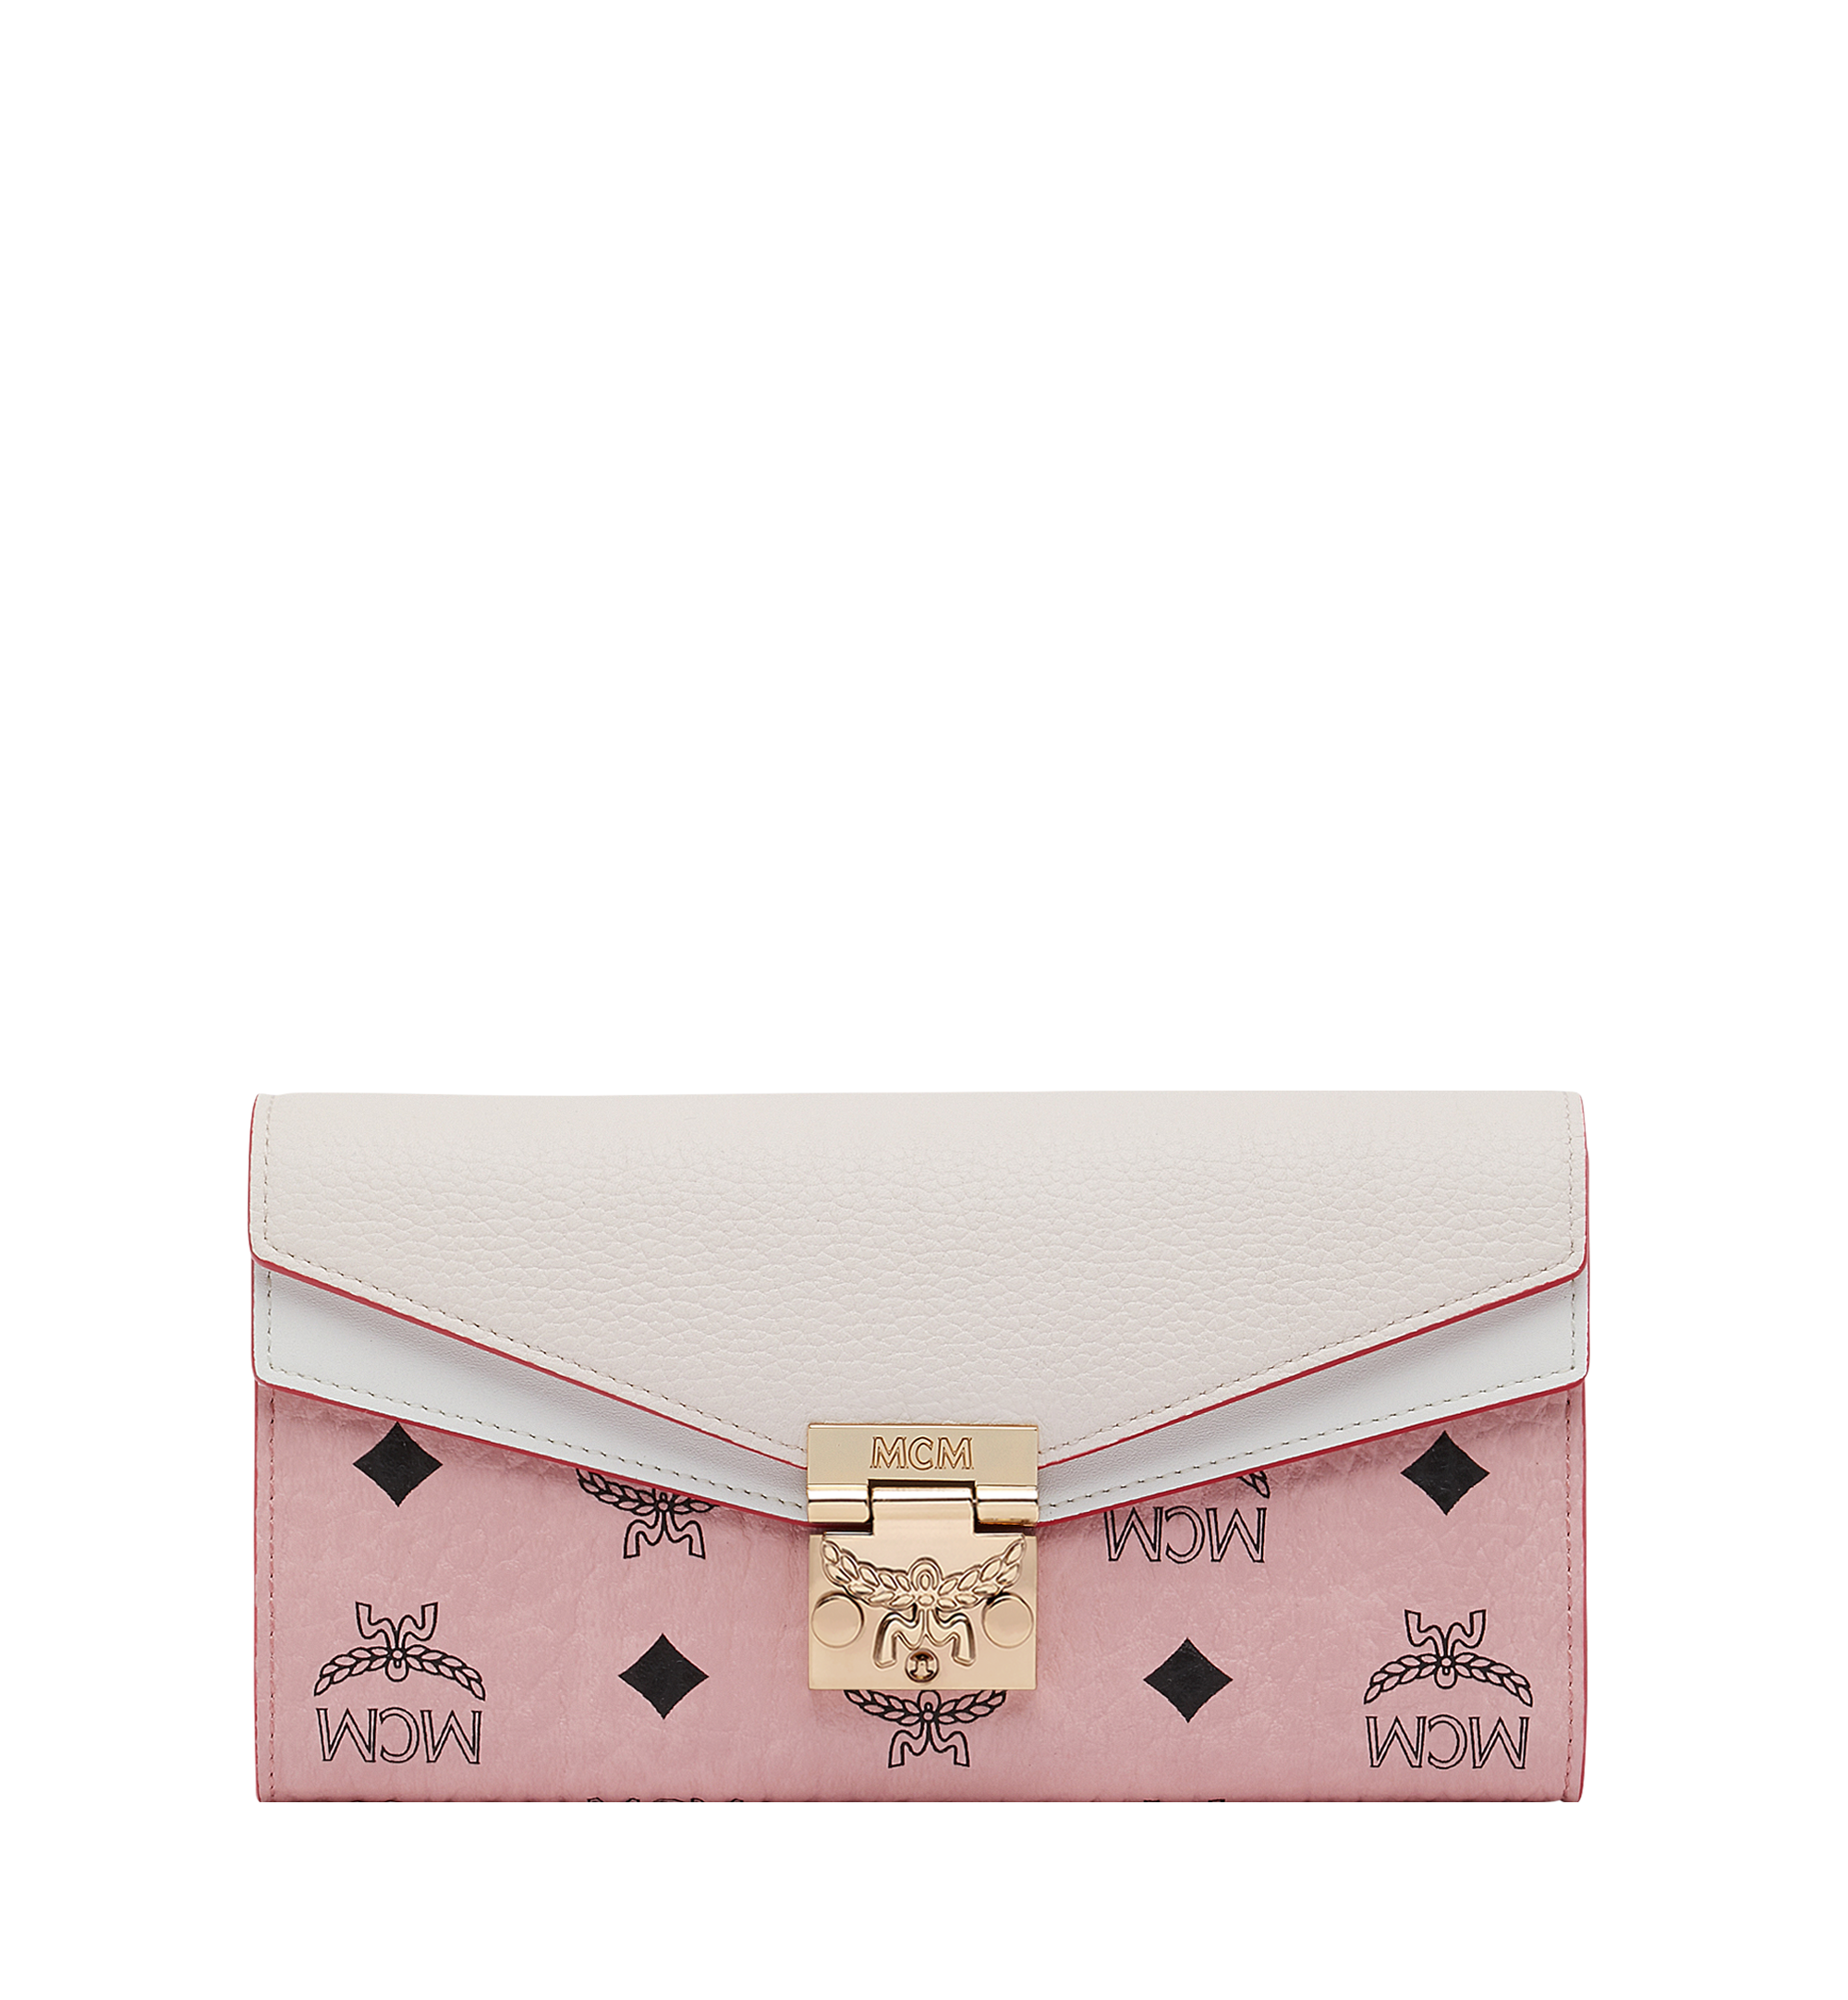 MCM Love Letter Crossbody Large Colorblock Visetos Ruby Red in